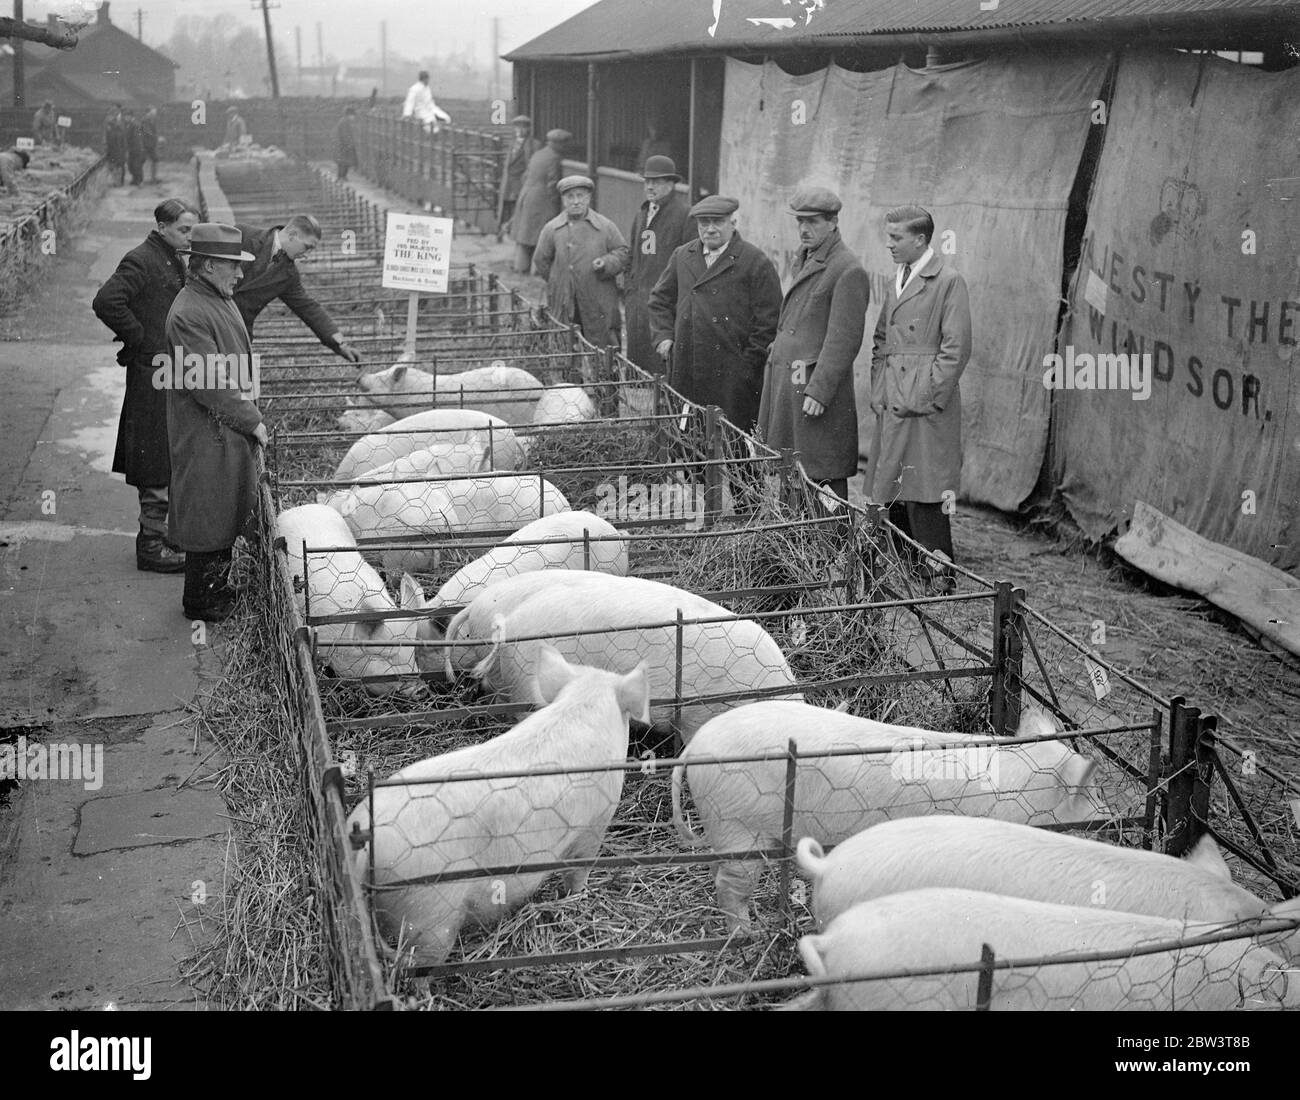 King ' s livestock auctioned at Slough christmas show . Pet stock from the Royal farms at Windsor were offfered for sale , by command of the King , at Slough Christmas Cattle show , when 30 fat cattle , 60 sheep and 50 pigs were sold by auction . There is always keen competition for the King ' s stock . Photo shows , the King ' s pigs on view before sale . 10 December 1935 Stock Photo